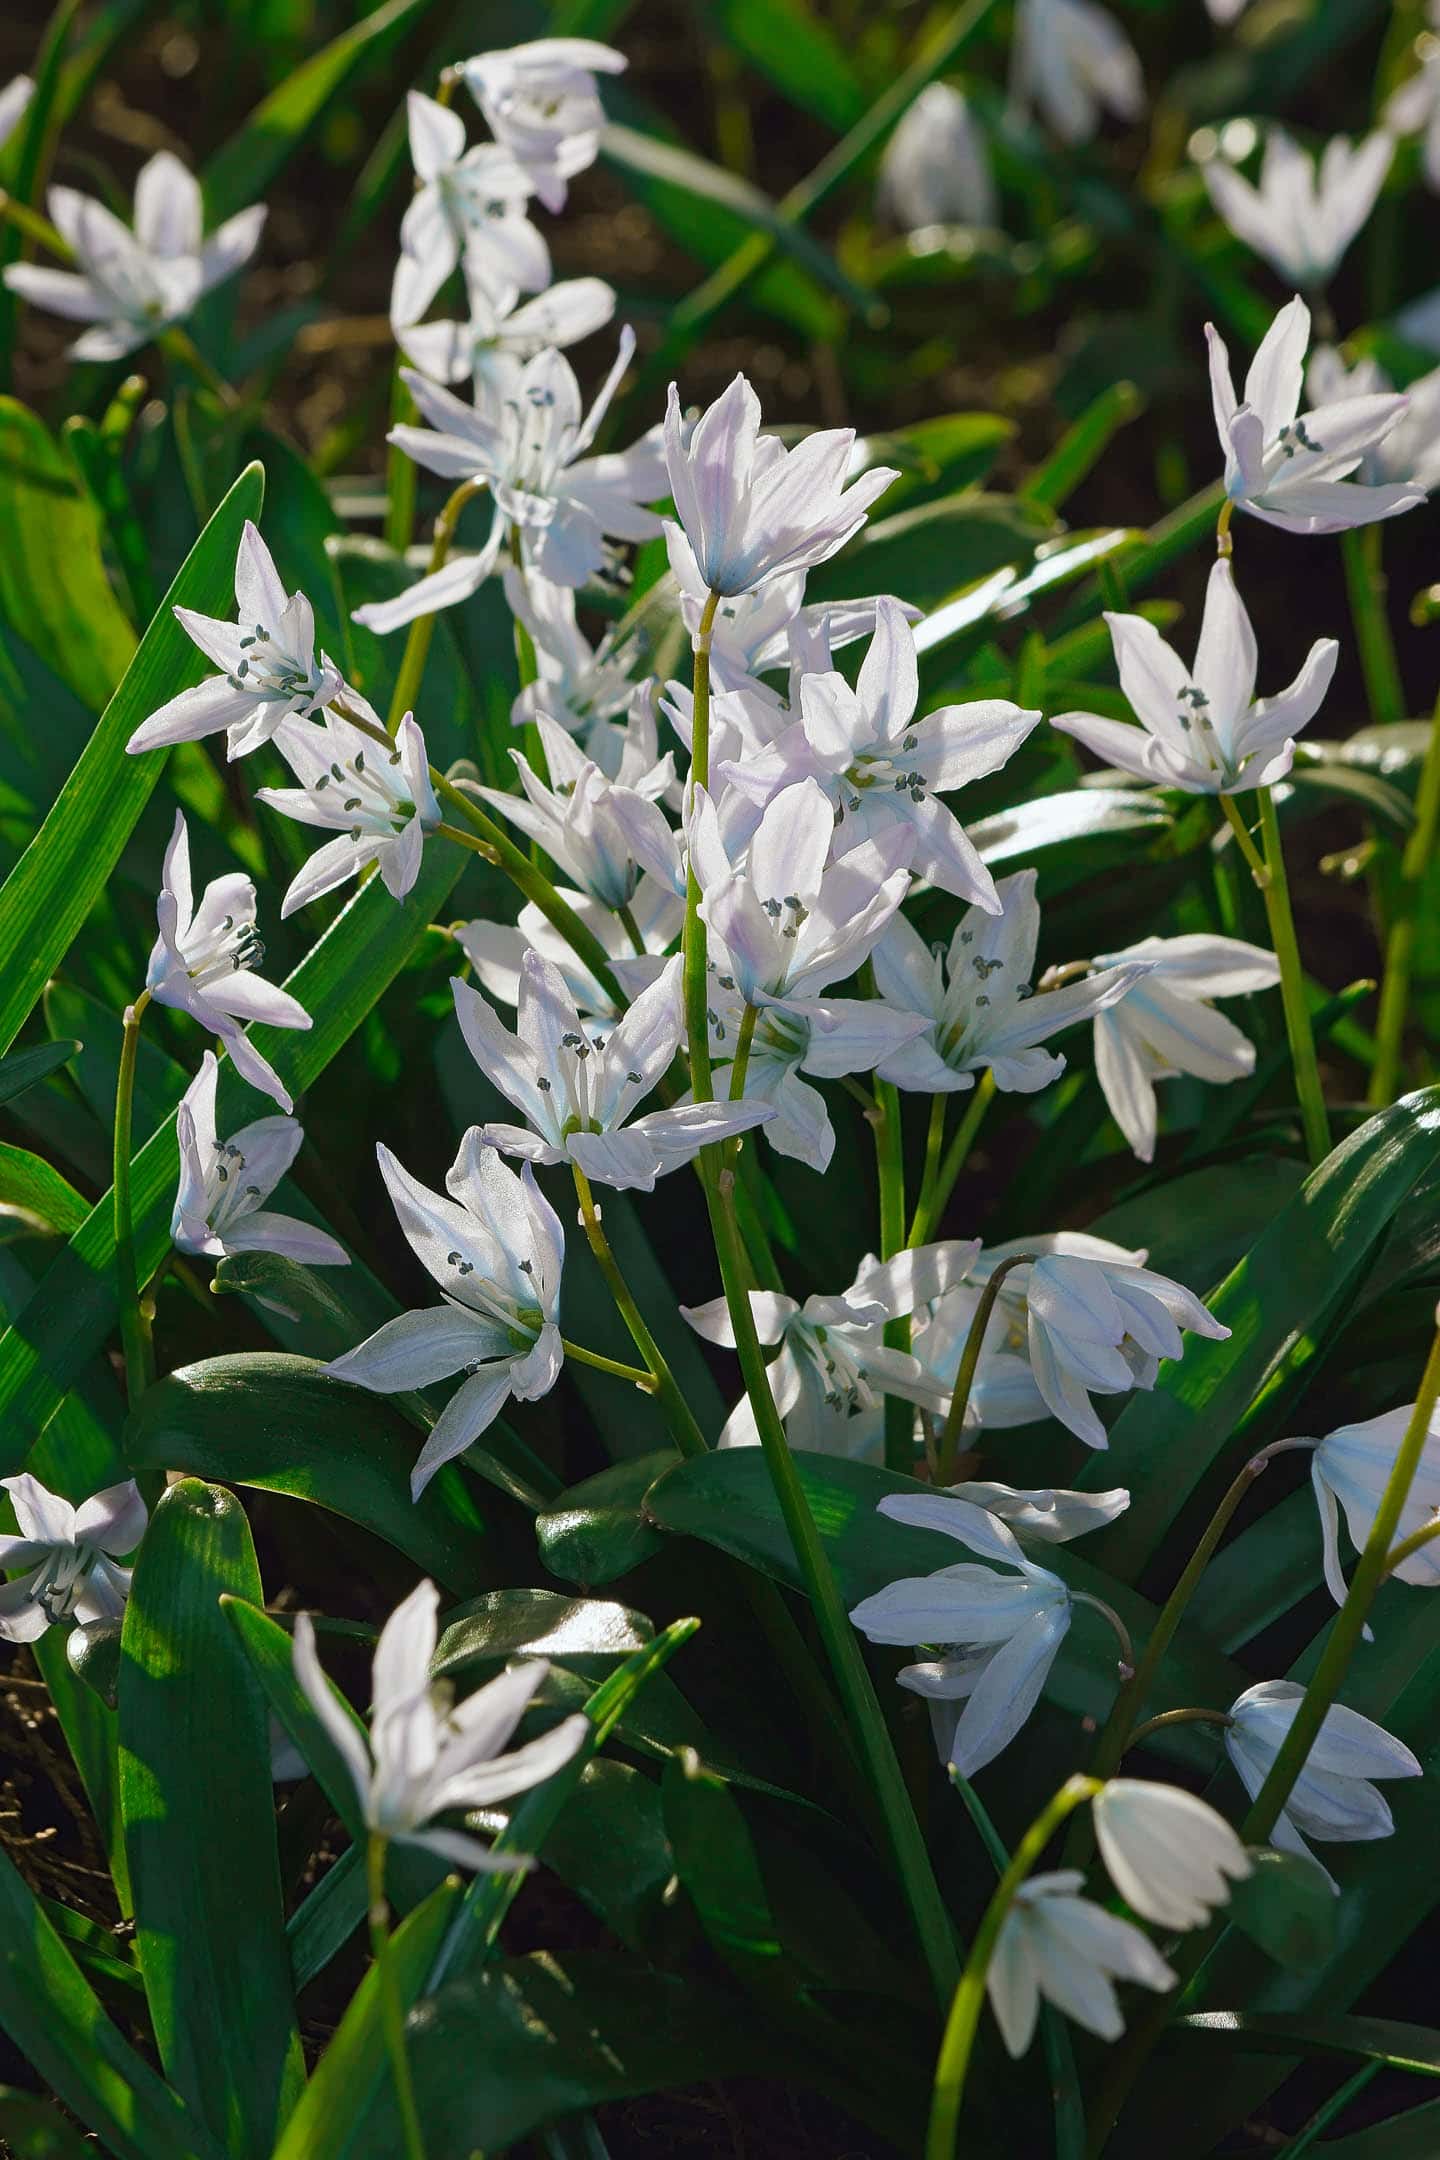 White squill flowers